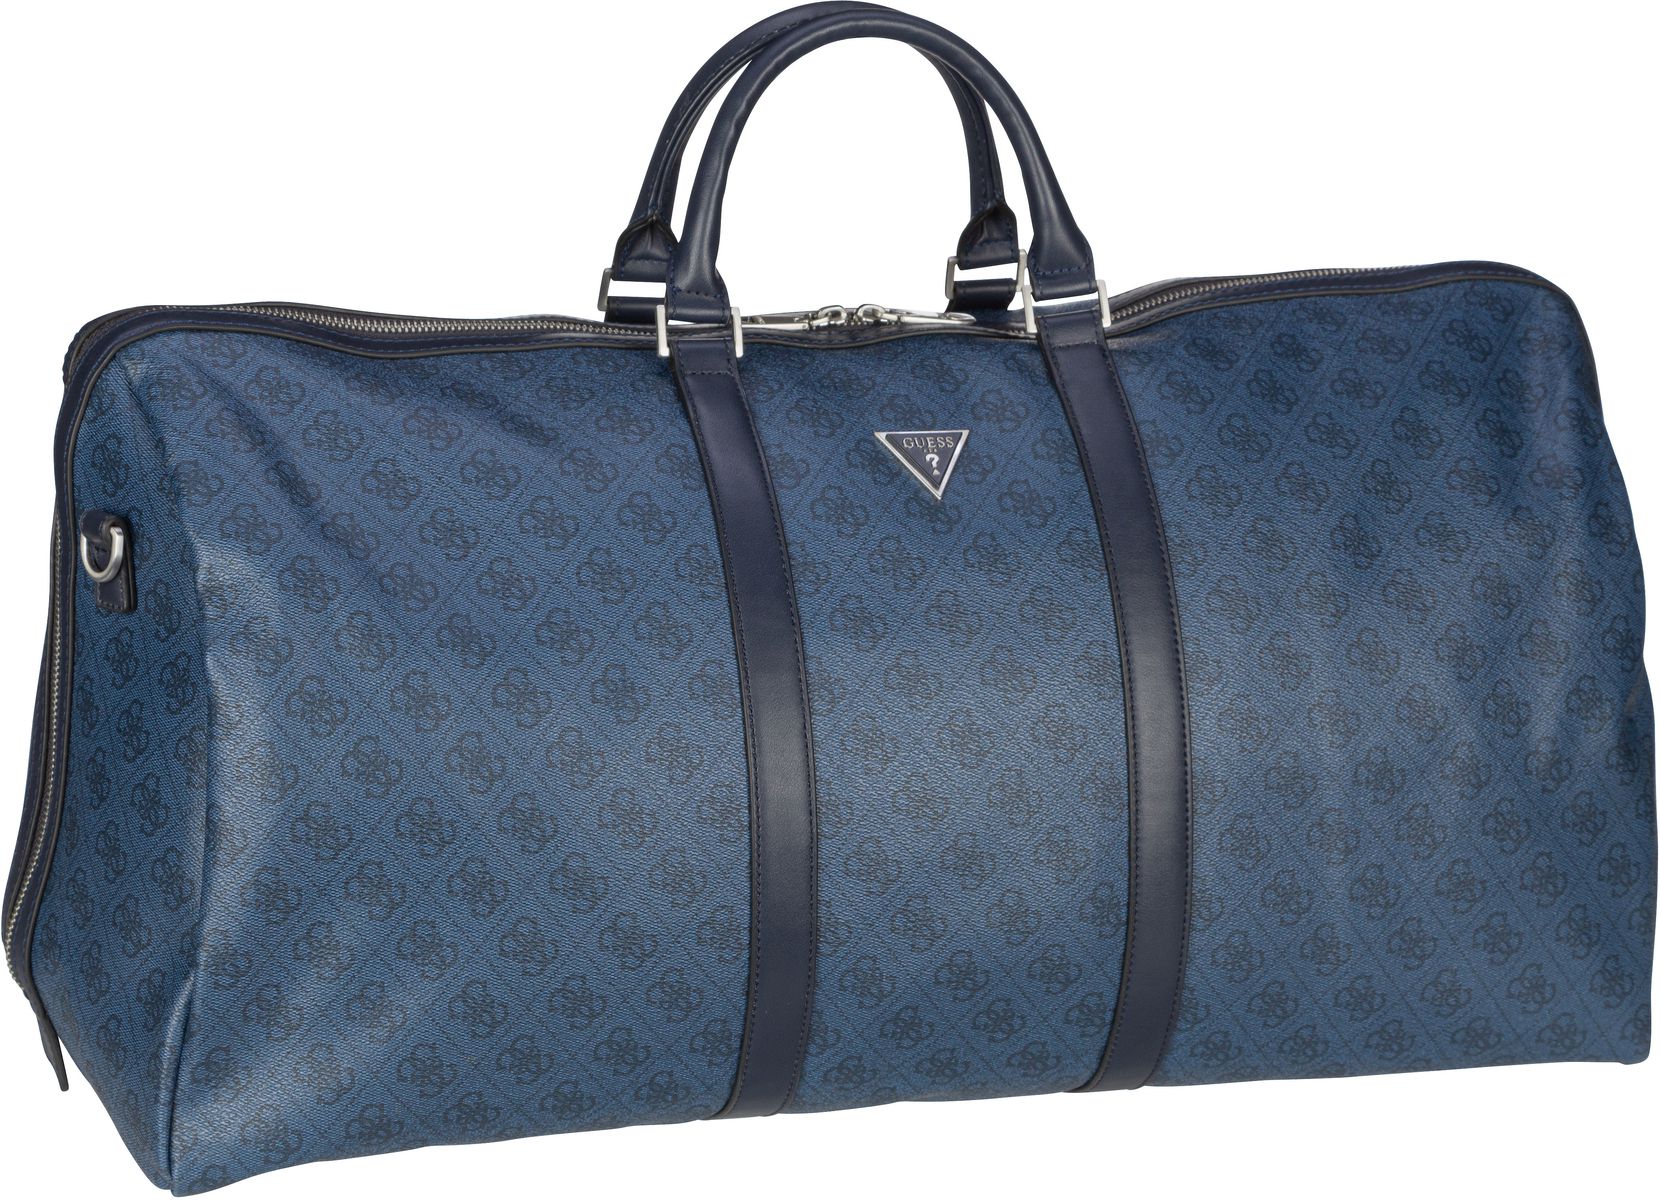 Guess Vezzola Smart Large Weekender - Blue